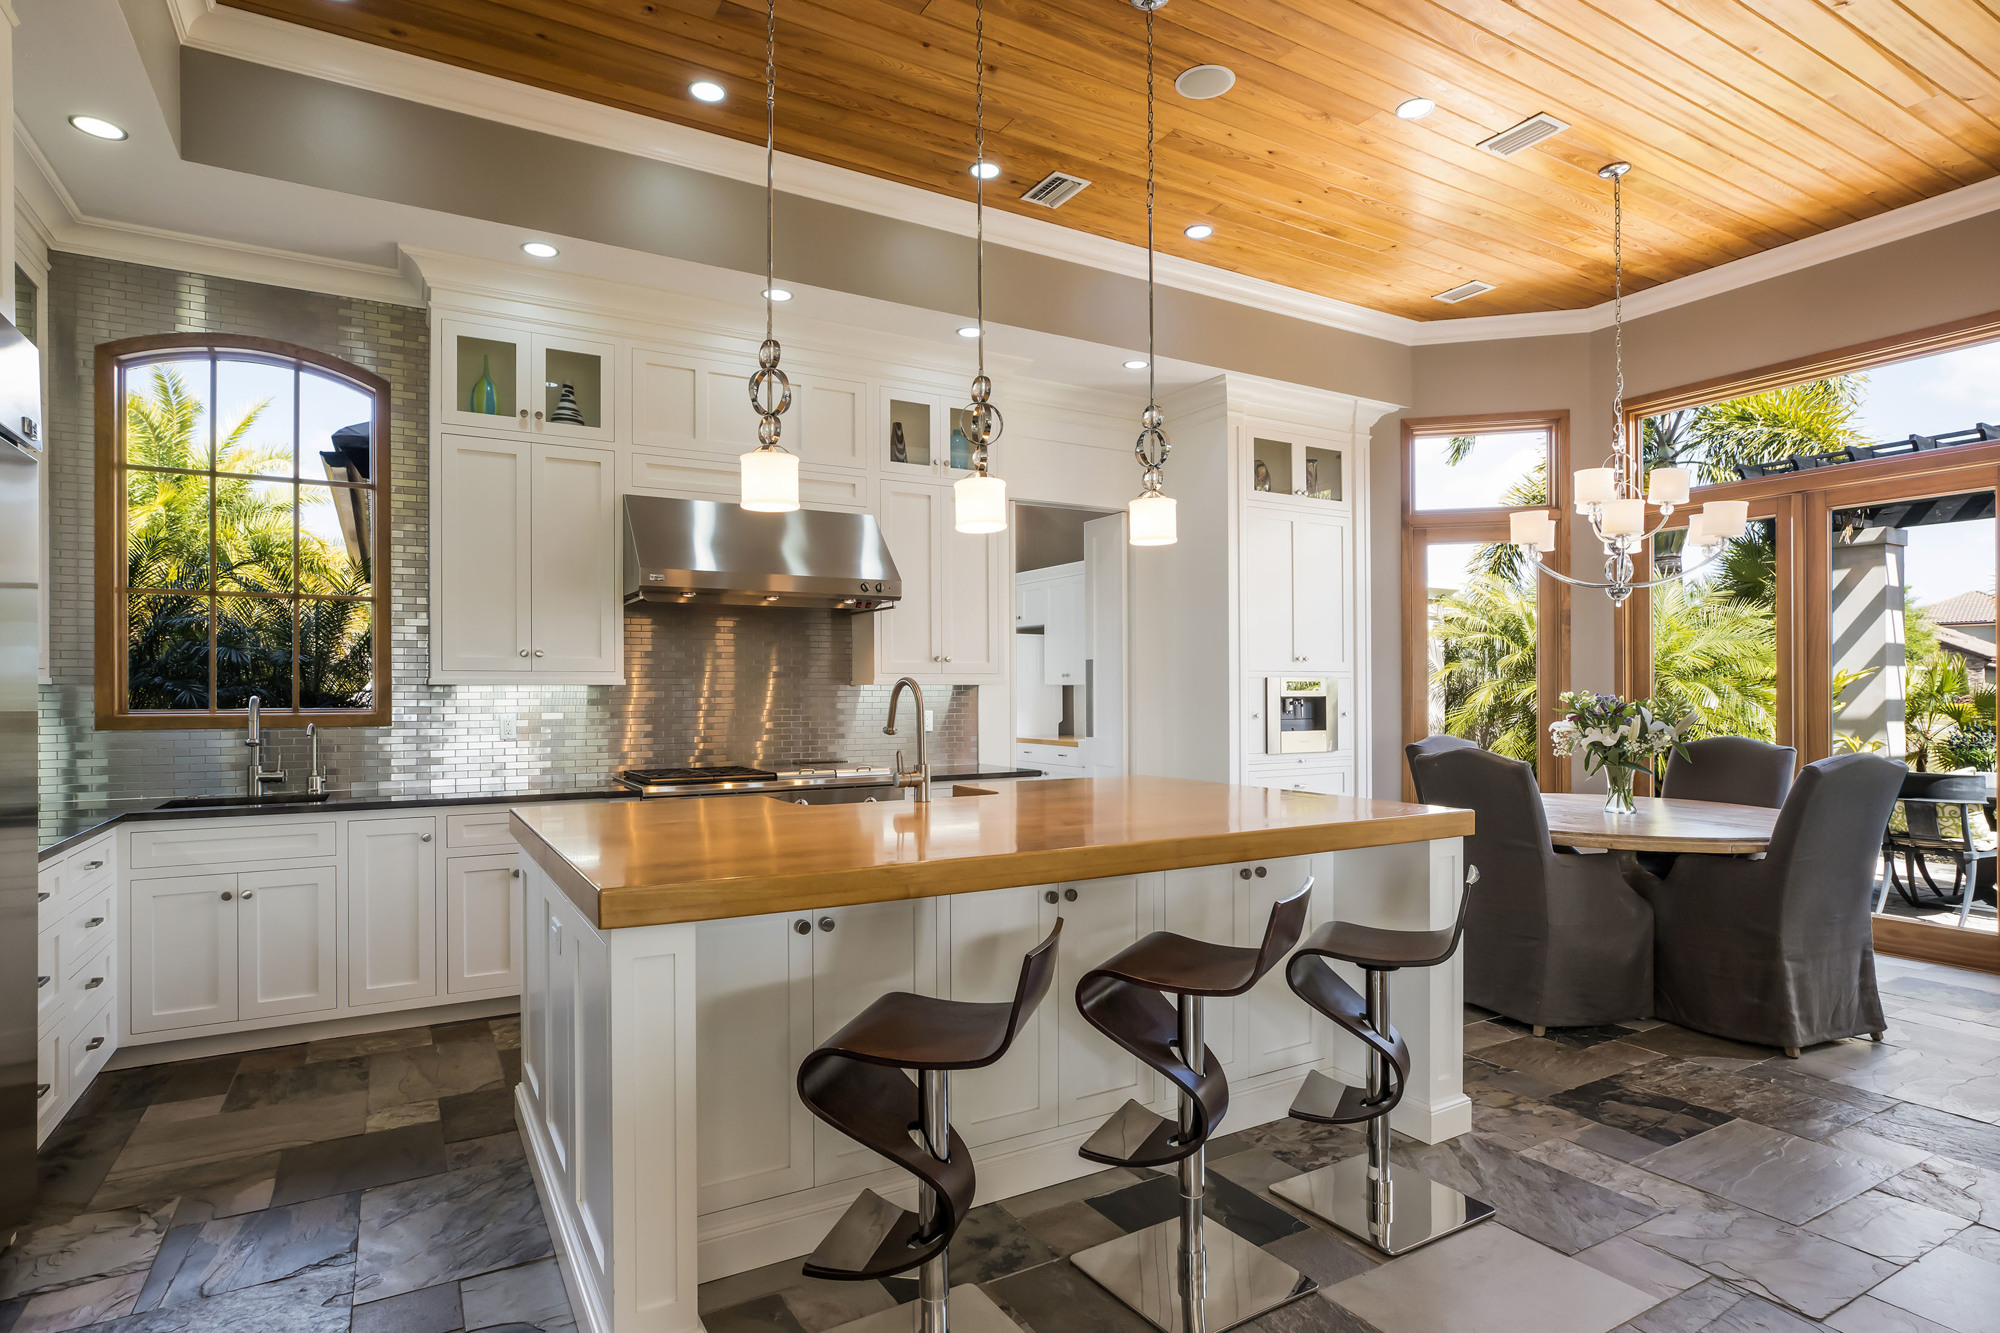 Wood warms up the kitchen with a paneled ceiling and a large island. A breakfast area is to the right, with an outdoor dining terrace through glass doors.